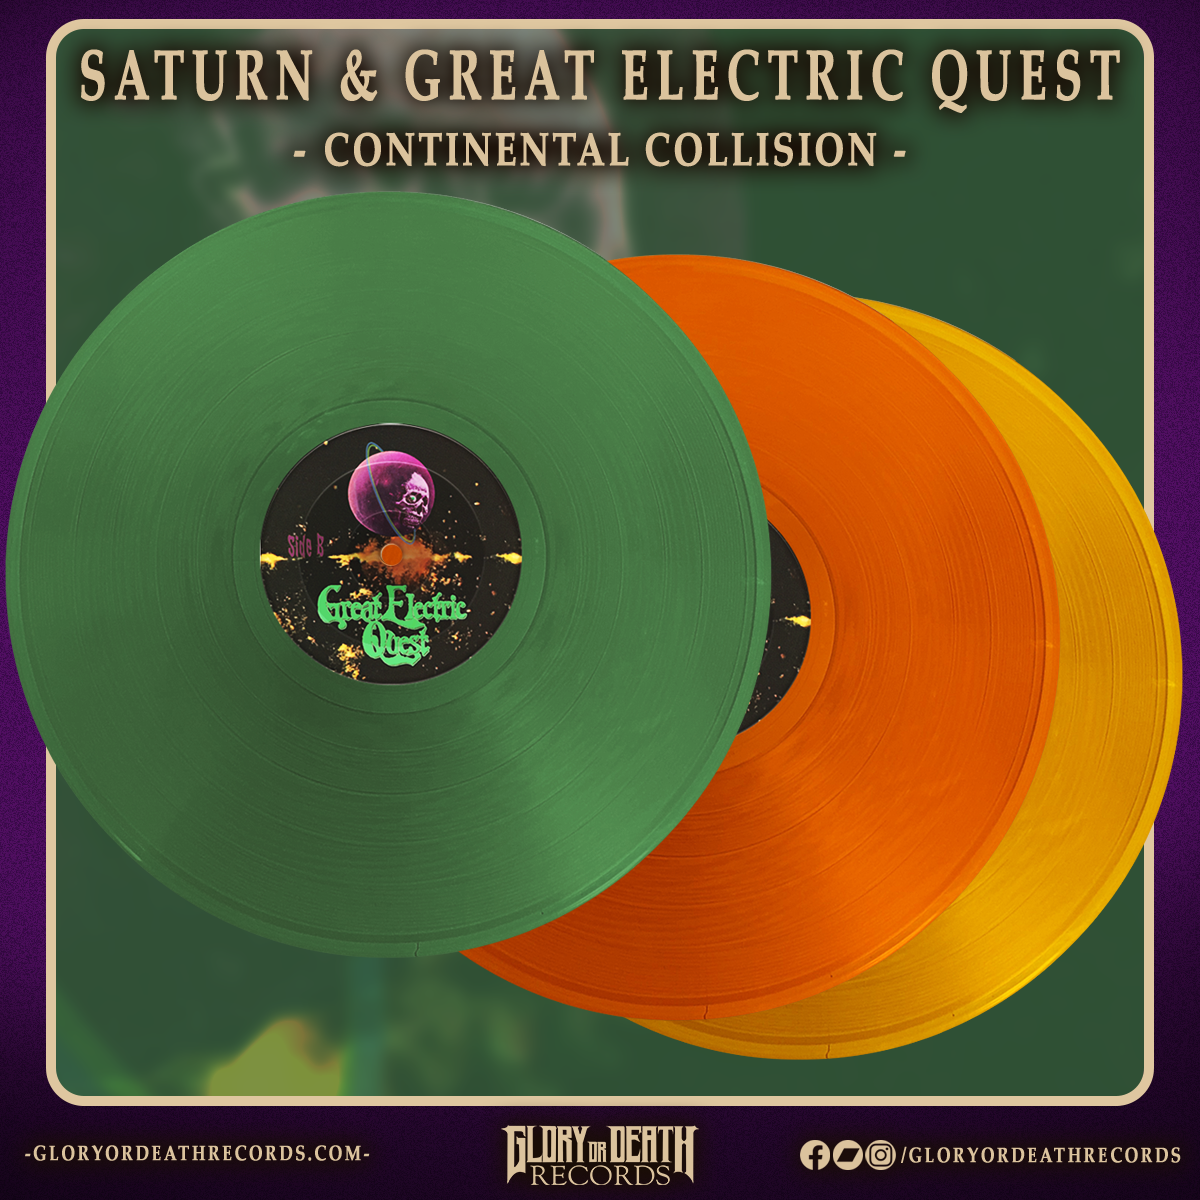 Saturn & Great Electric Quest Continental Collision Vinyl) — Glory or Death